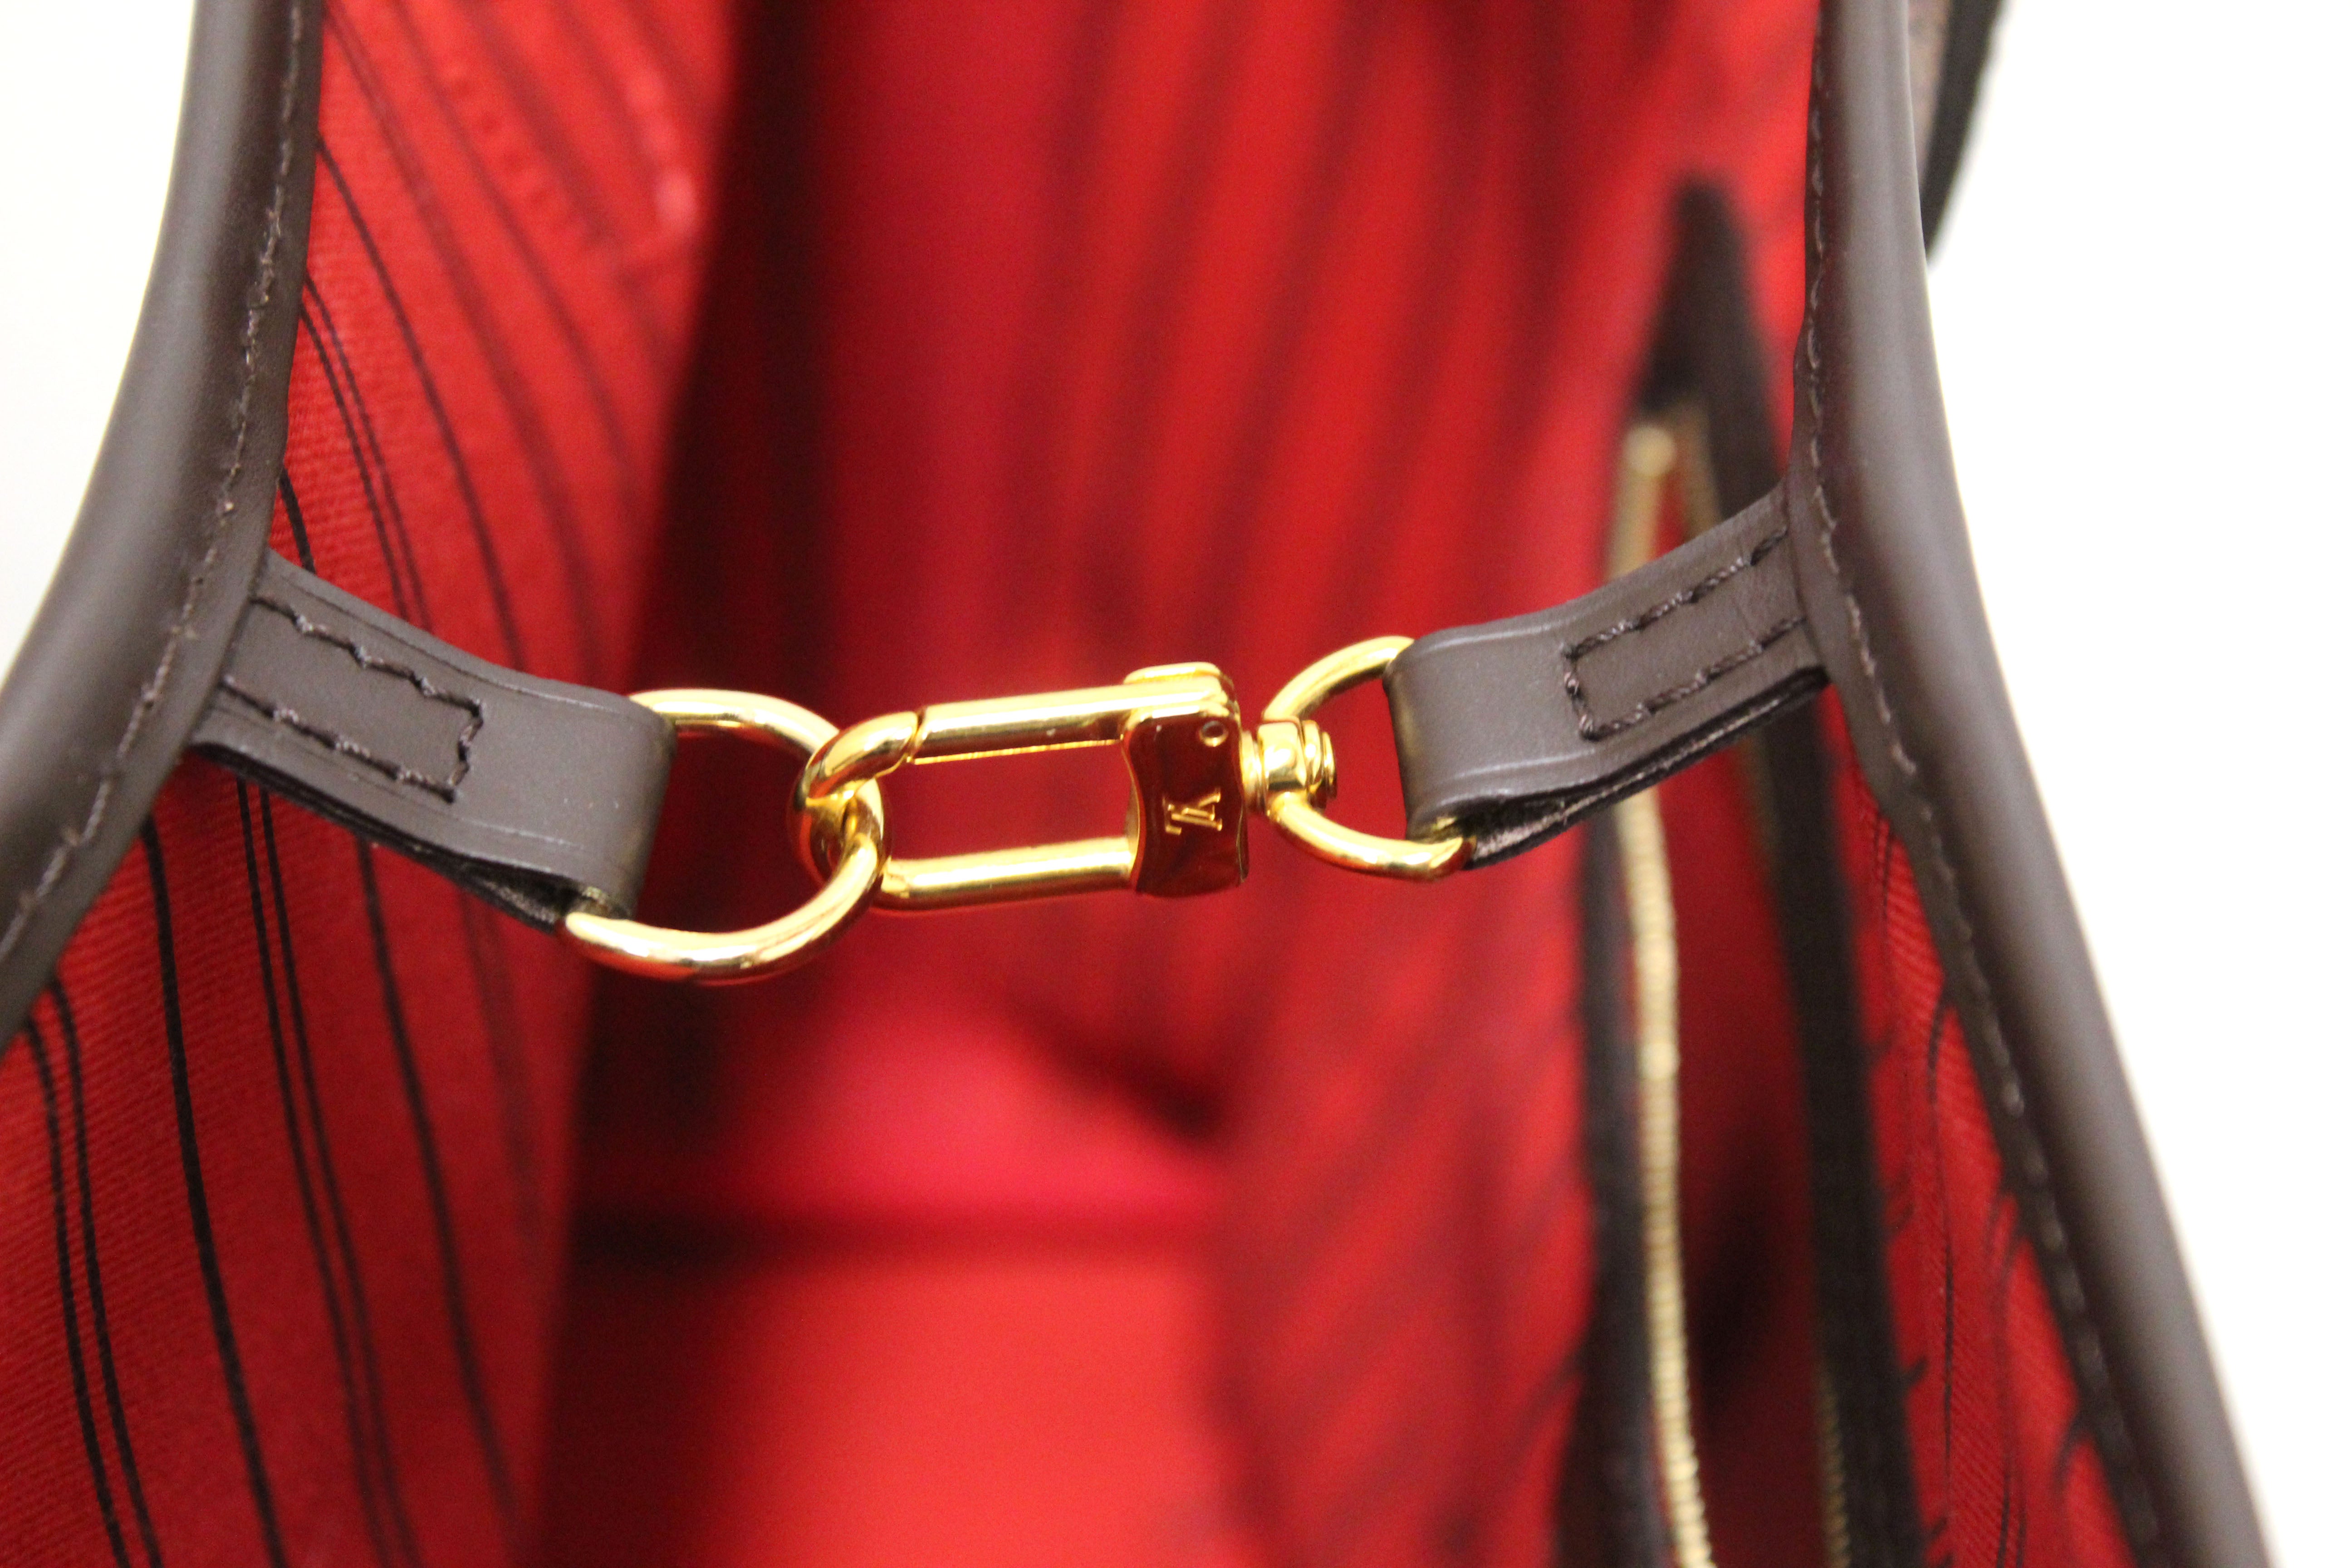 Louis Vuitton: This Neverfull MM Comes With A Shoulder Strap